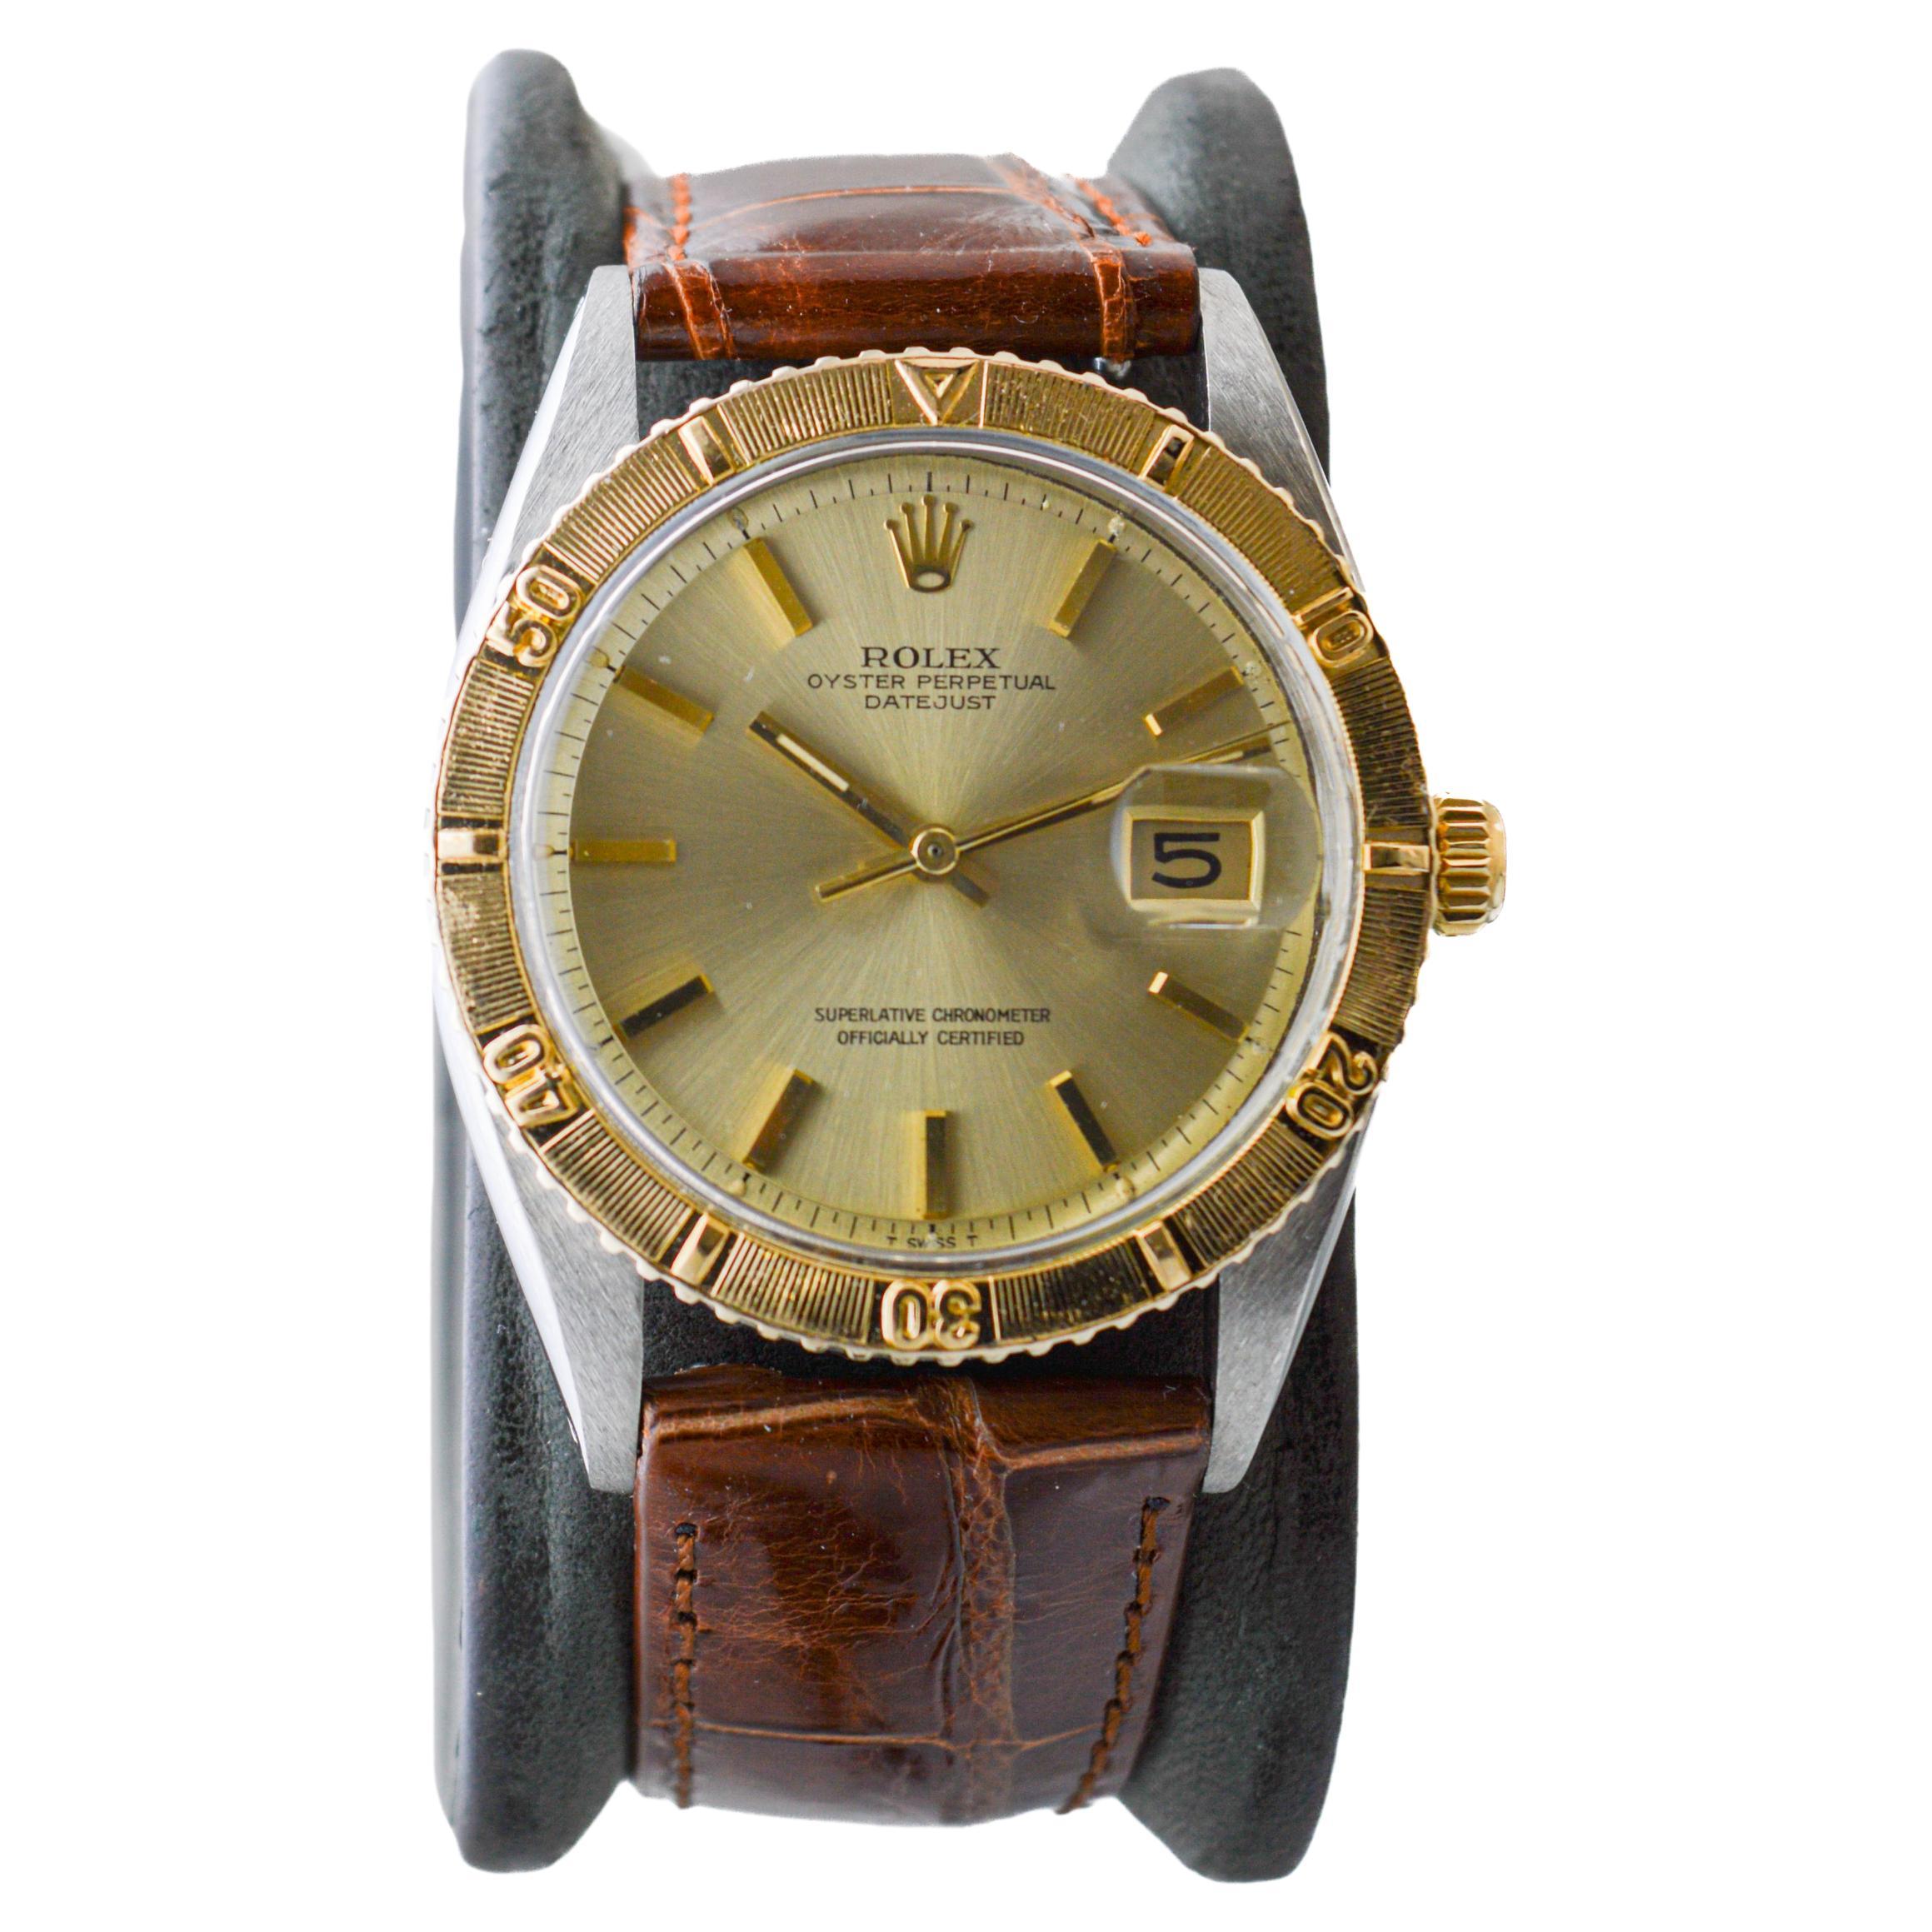 FACTORY / HOUSE: Rolex Watch Company
STYLE / REFERENCE: Oyster Perpetual Datejust 